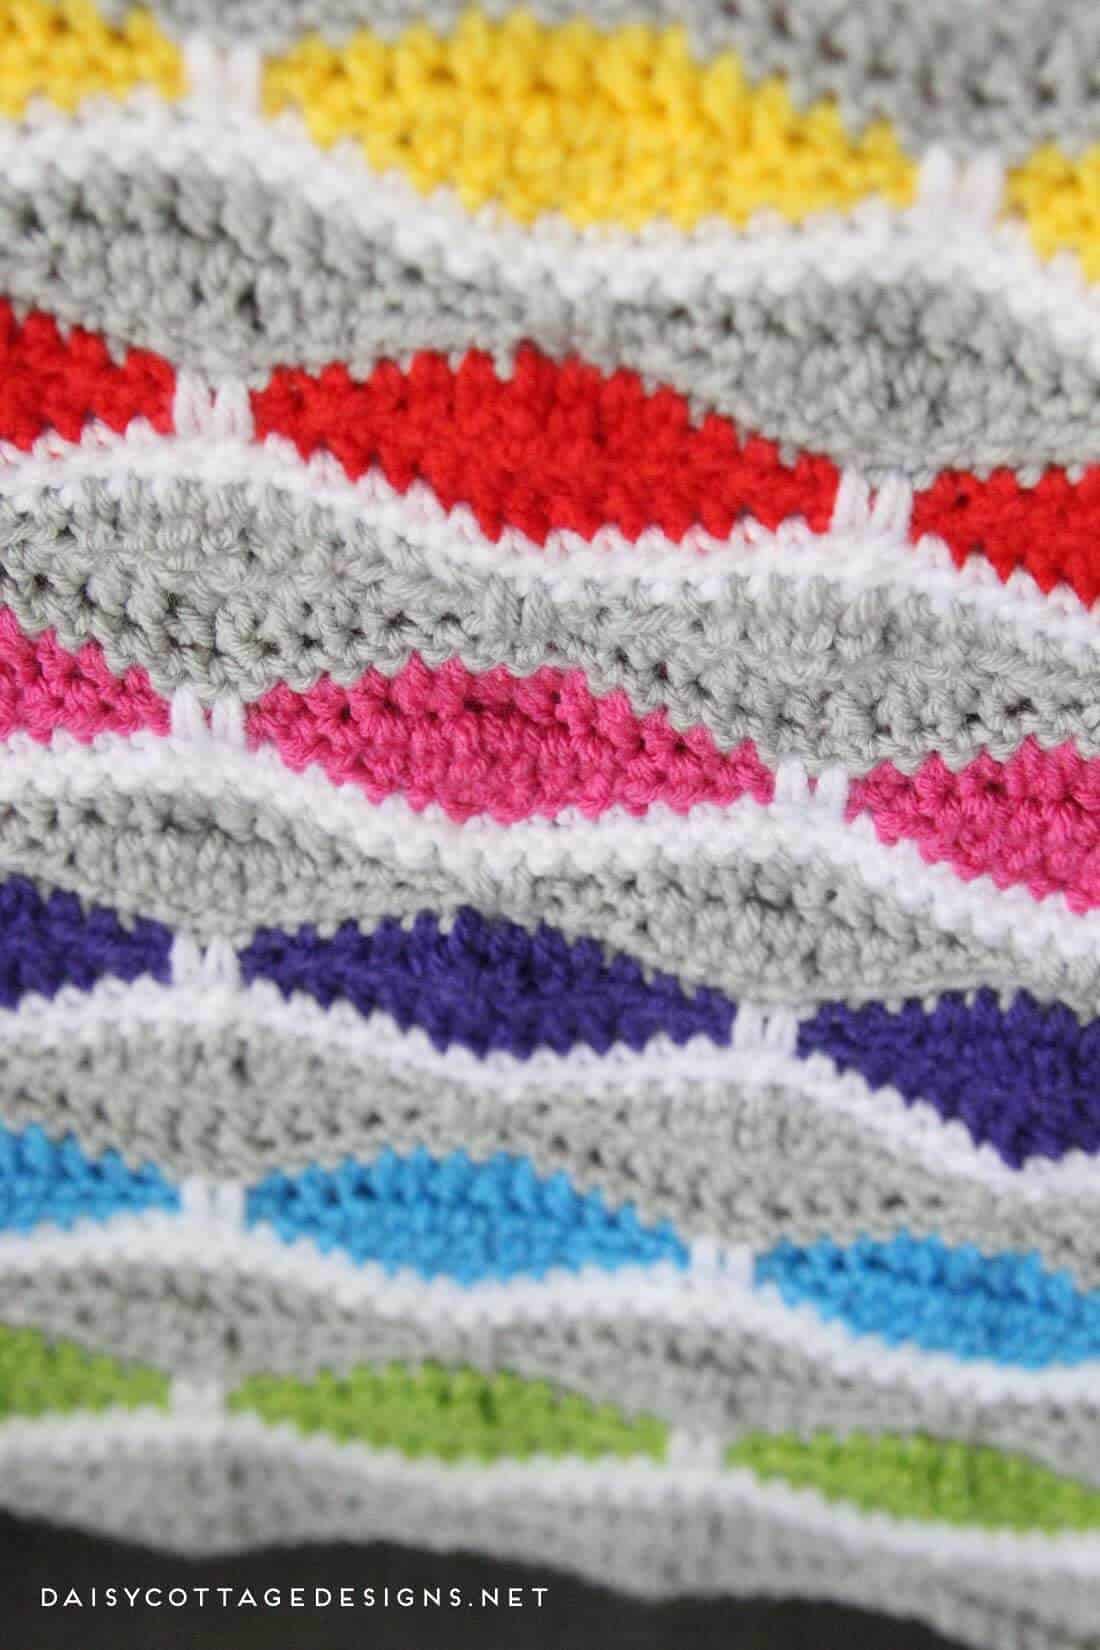 crochet blanket pattern | free crochet patterns | crochet afghan pattern | modern crochet pattern | Use this free crochet pattern from Daisy Cottage Designs to create this bright and fun afghan. Whether you're making a baby blanket for a friend or you just want a something to drape over your favorite chair, you'll love this crochet pattern. Instructions given to make this blanket in any size. 